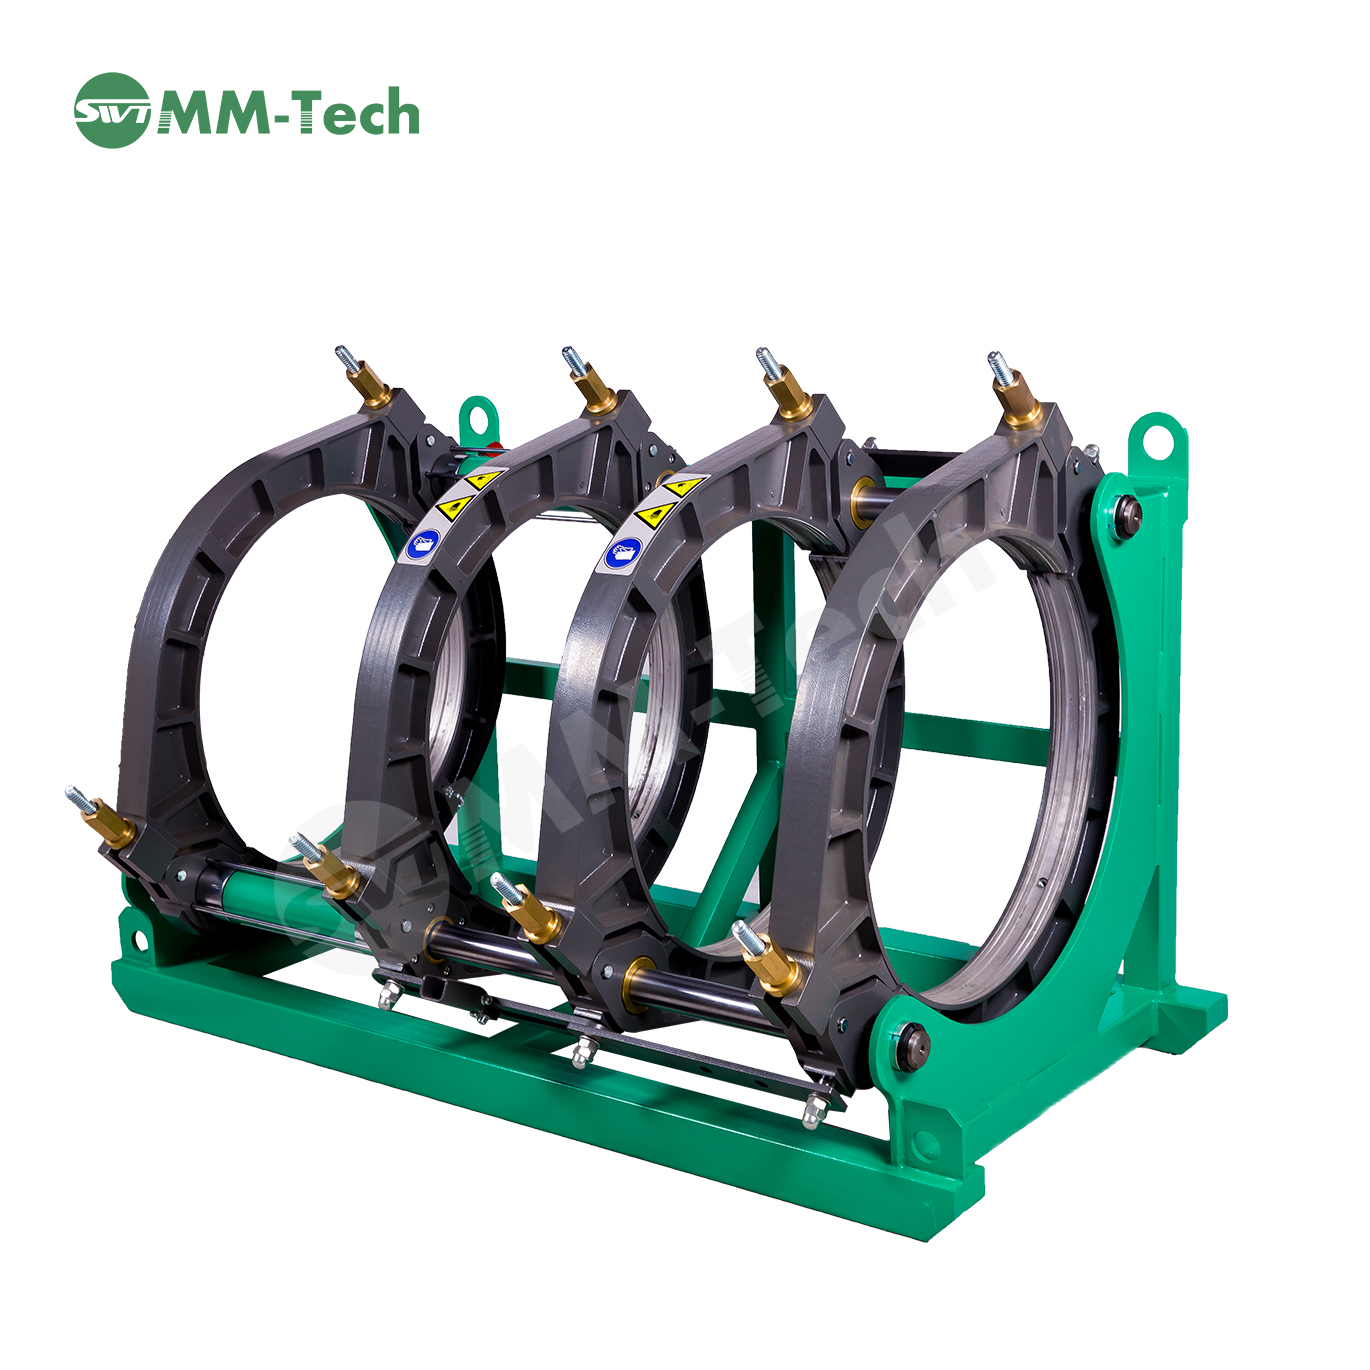 Thermofusion Welding Machine 